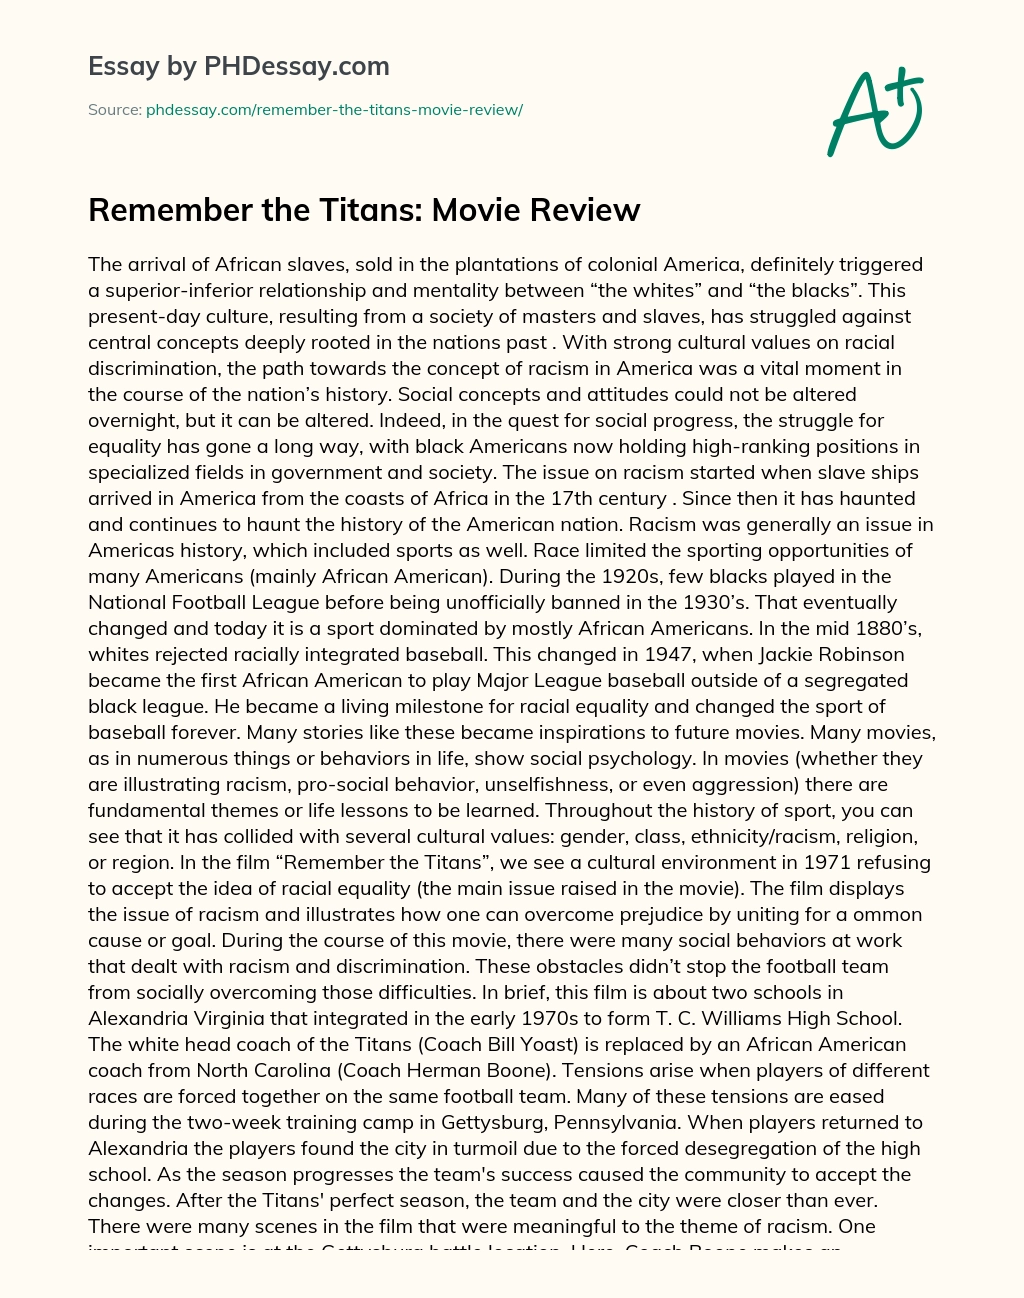 Remember the Titans: Movie Review essay